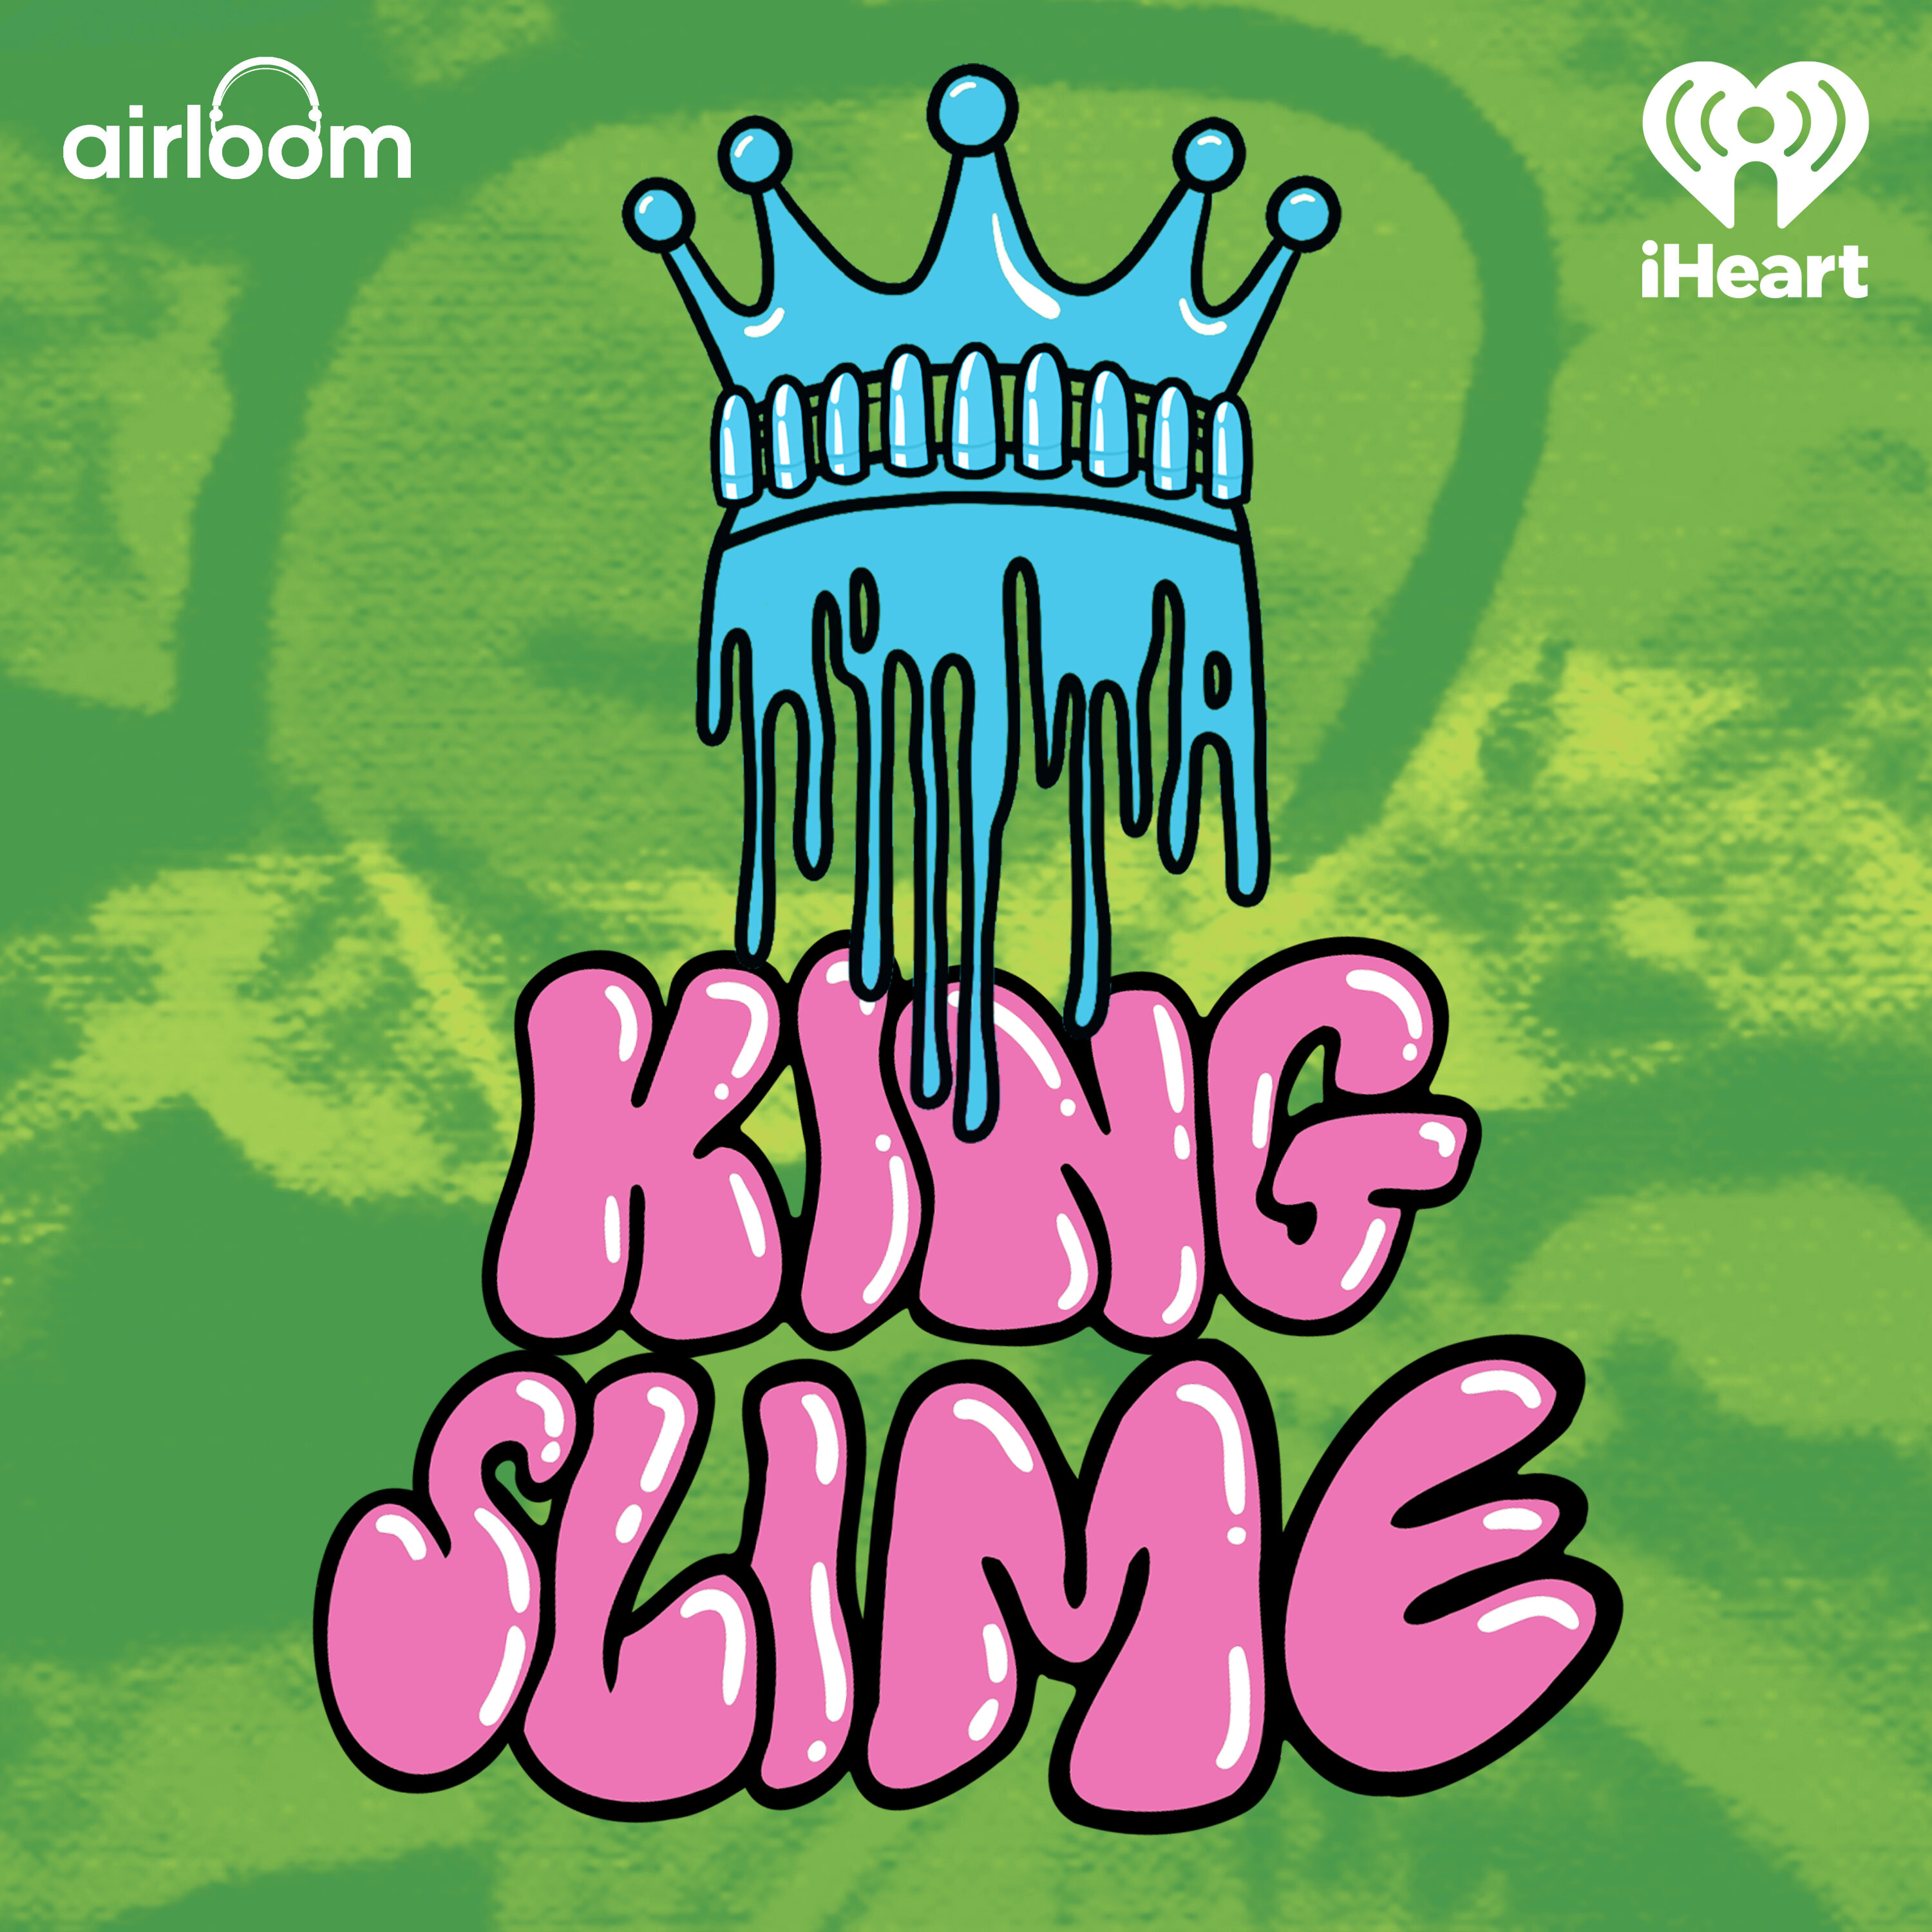 King Slime: The Prosecution of Young Thug and YSL podcast show image